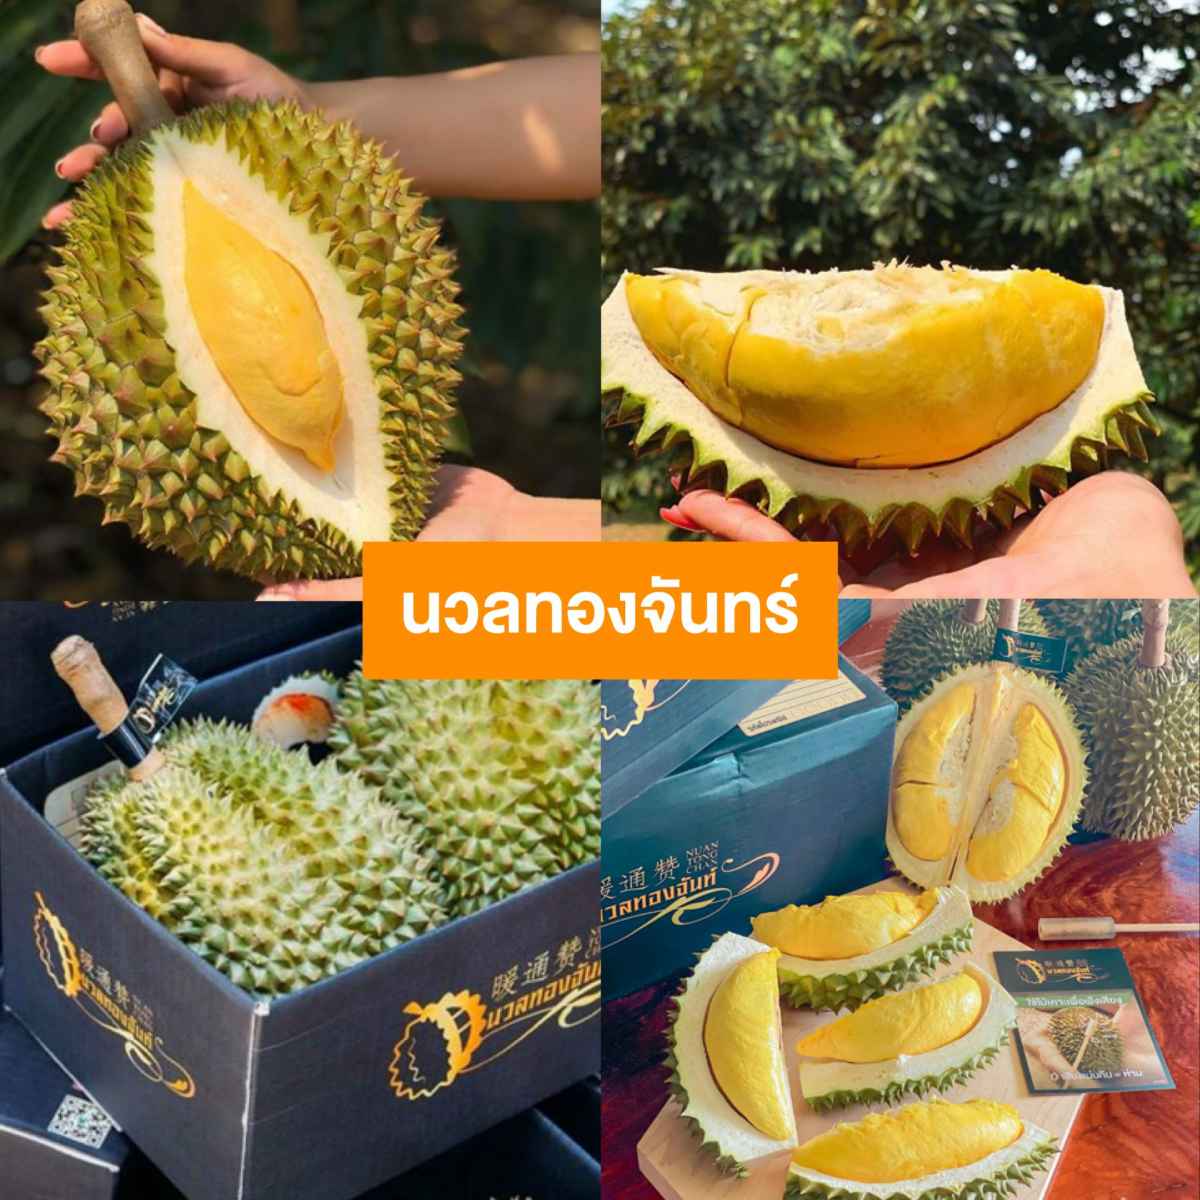 durian-delivery